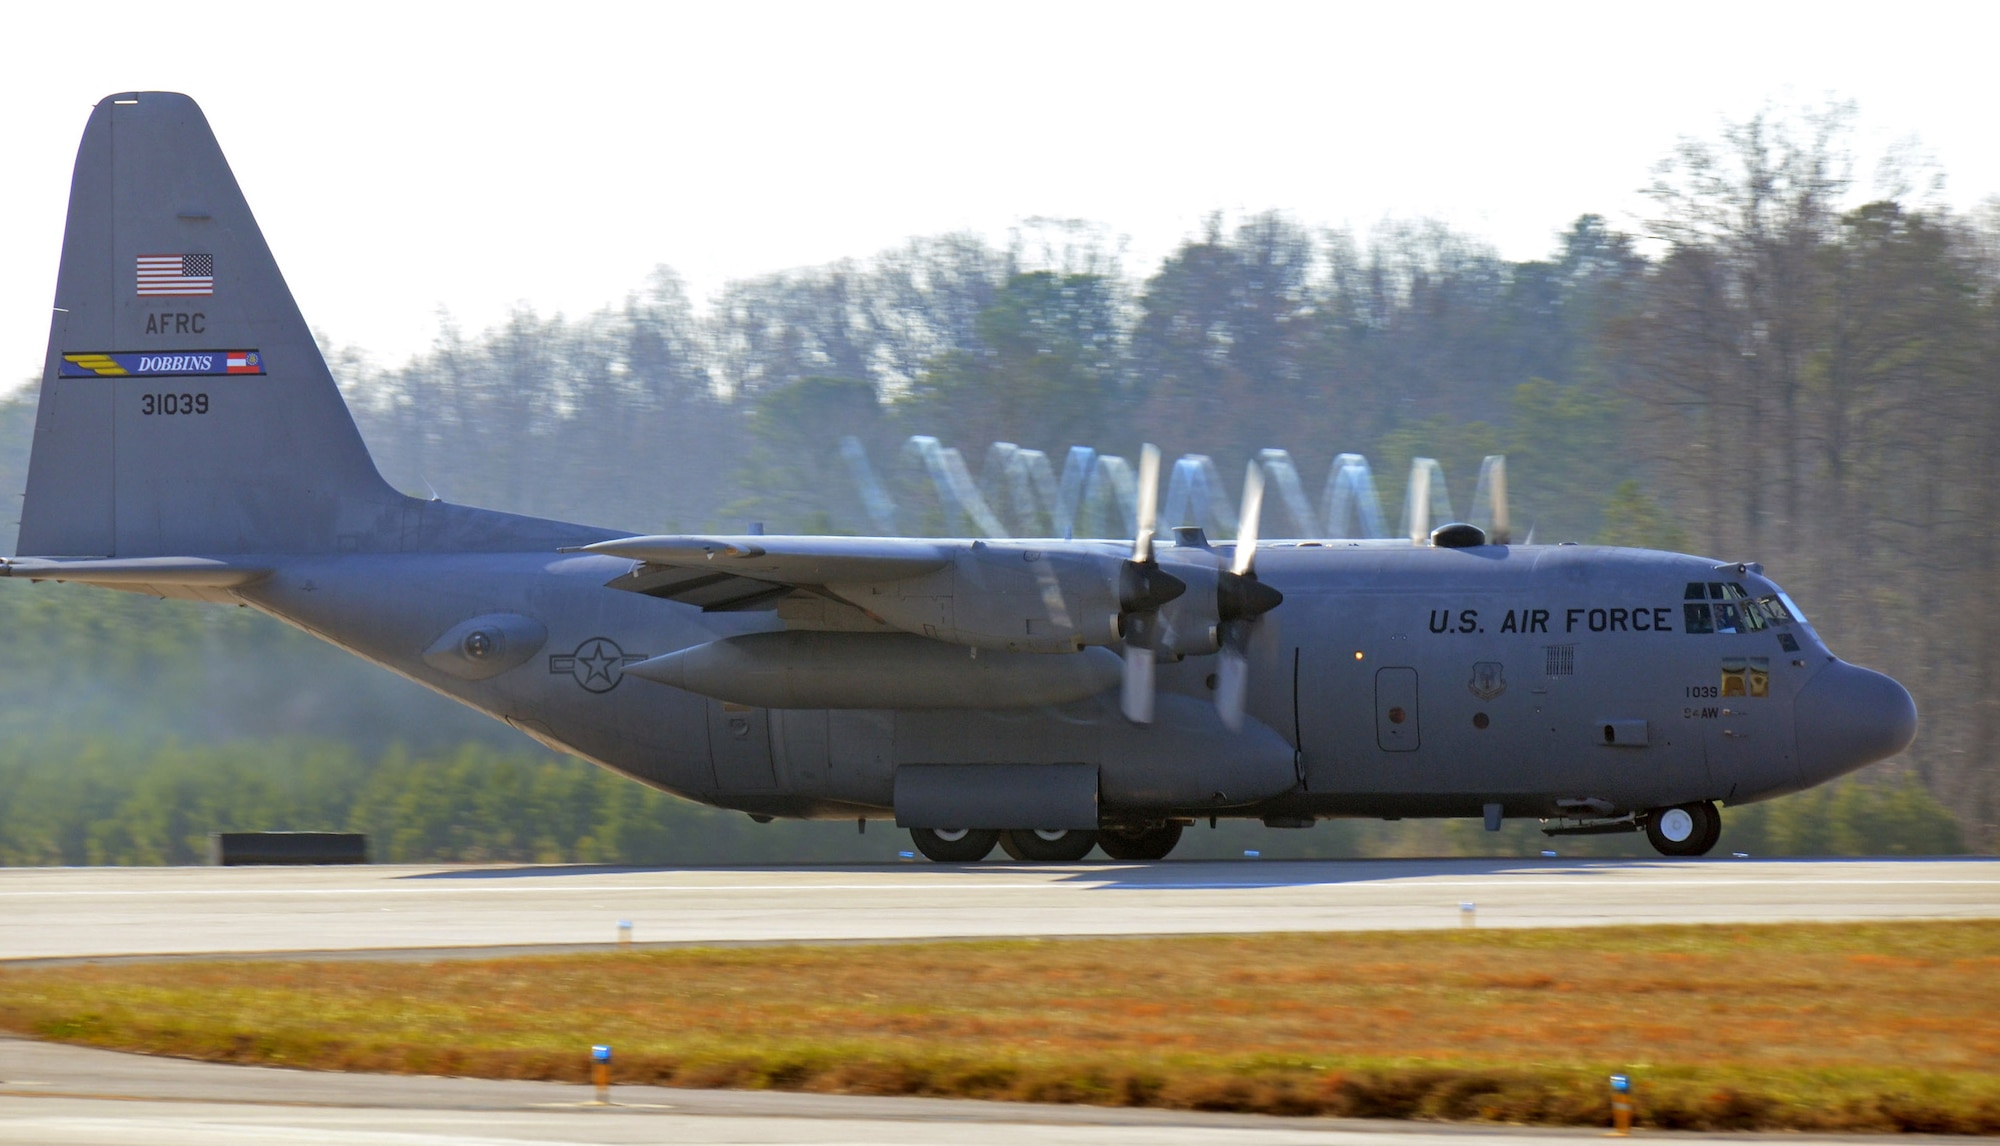 The 94th Airlift Wing C-130H3 beats the moisture out of the air as it accelerates down the Dobbins runway on its way to Southwest Asia; Dobbins Air Reserve Base, Ga., Jan. 5, 2015. (U.S. Air Force photo/Brad Fallin)